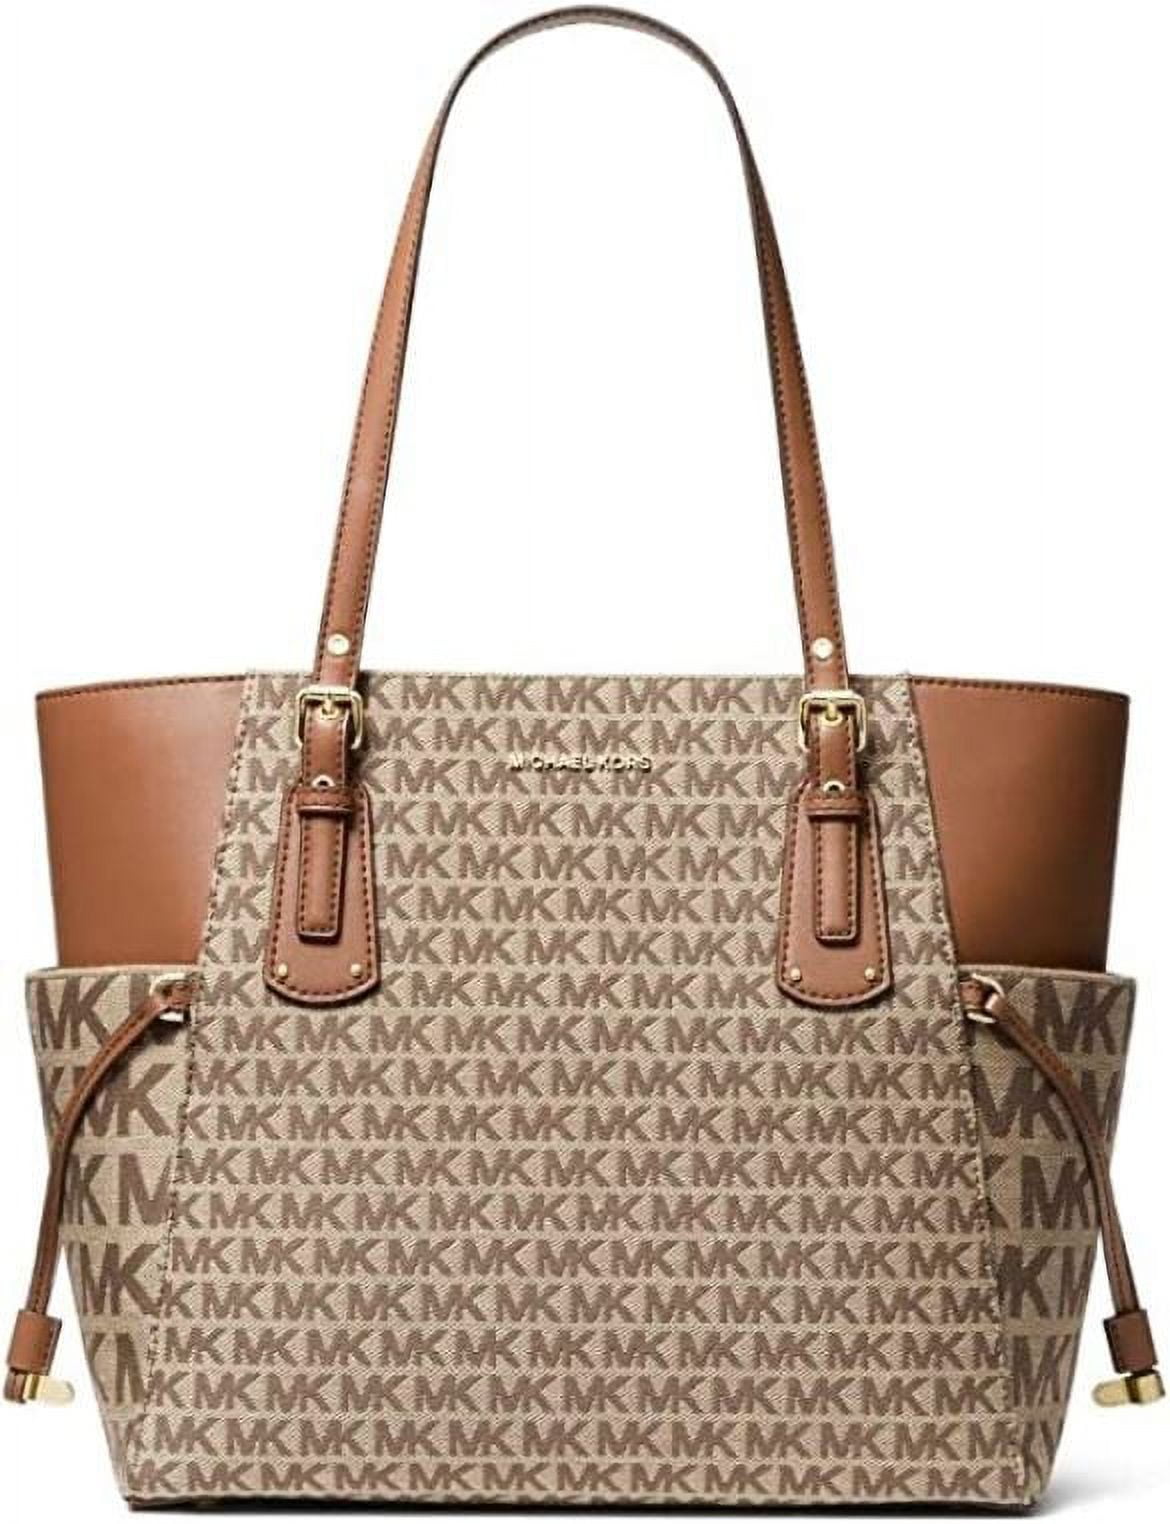  Michael Kors Voyager Large East West Tote Front Snap Pocket Top  Zip Shoulder Bag Leather (Marigold) : Clothing, Shoes & Jewelry